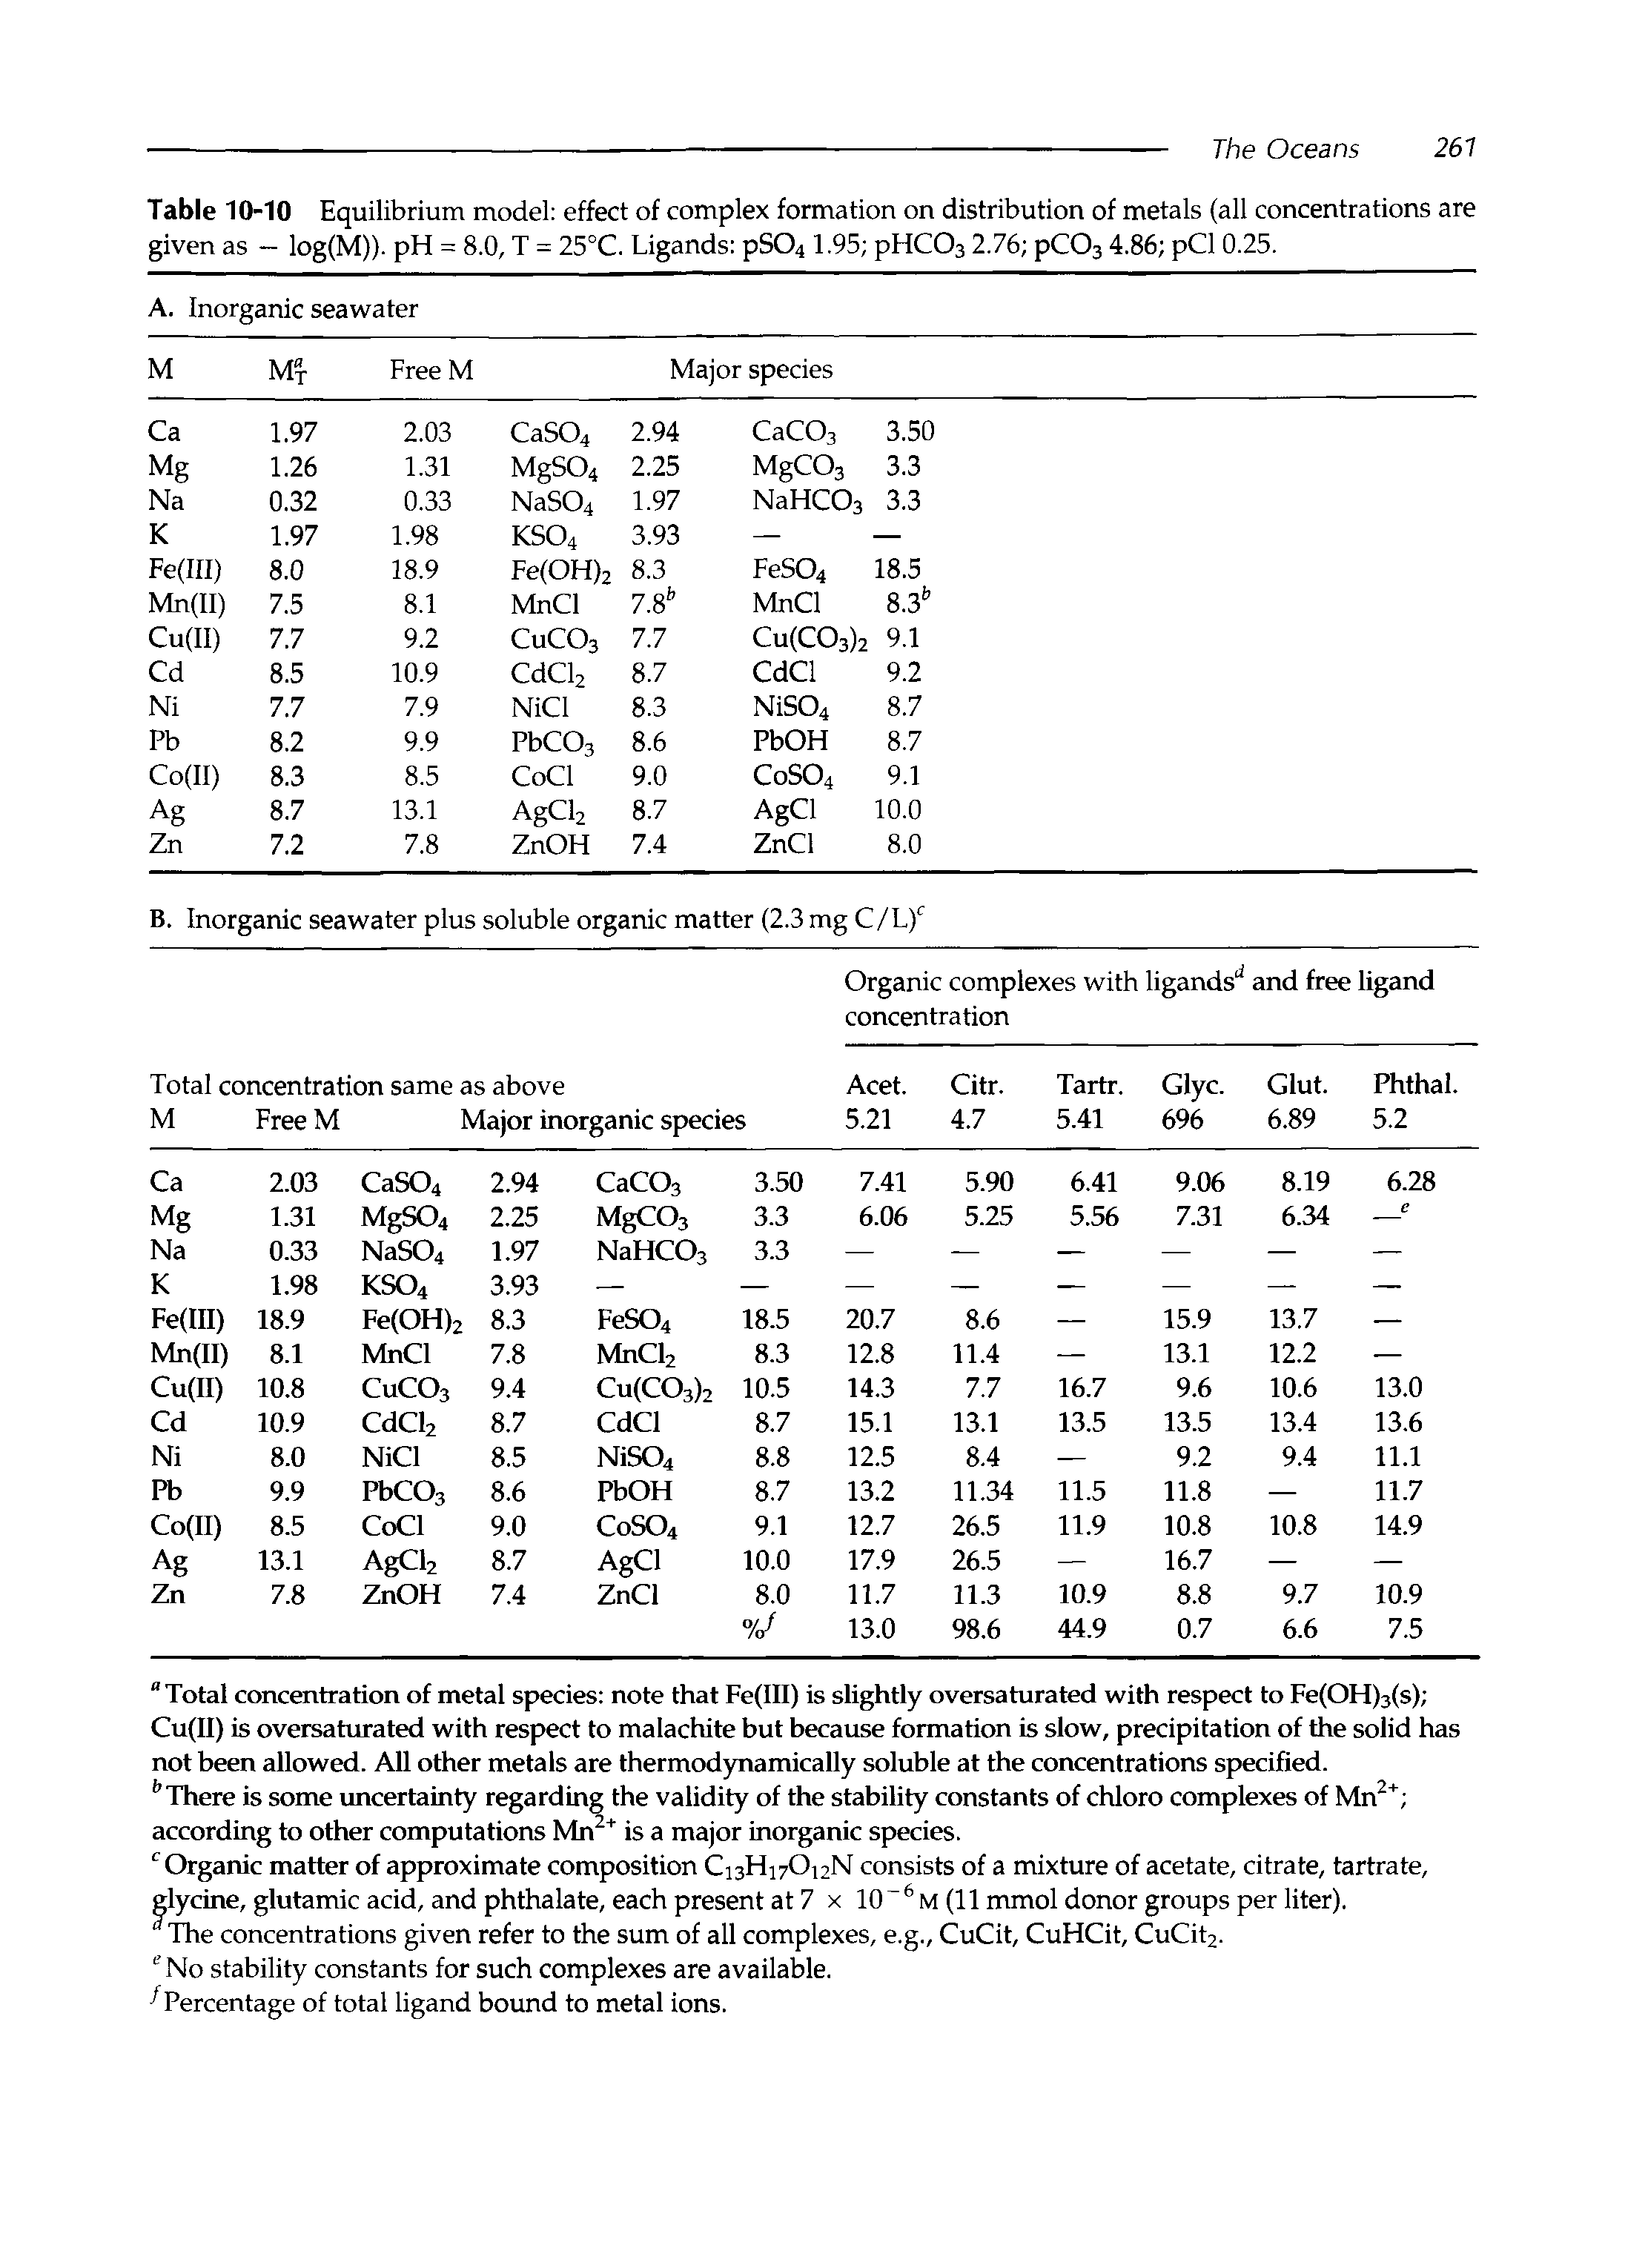 Table 10-10 Equilibrium model effect of complex formation on distribution of metals (all concentrations are given as — log(M)). pH = 8.0, T = 25°C. Ligands pS04 1.95 pHCOa 2.76 pCOs 4.86 pCl 0.25.